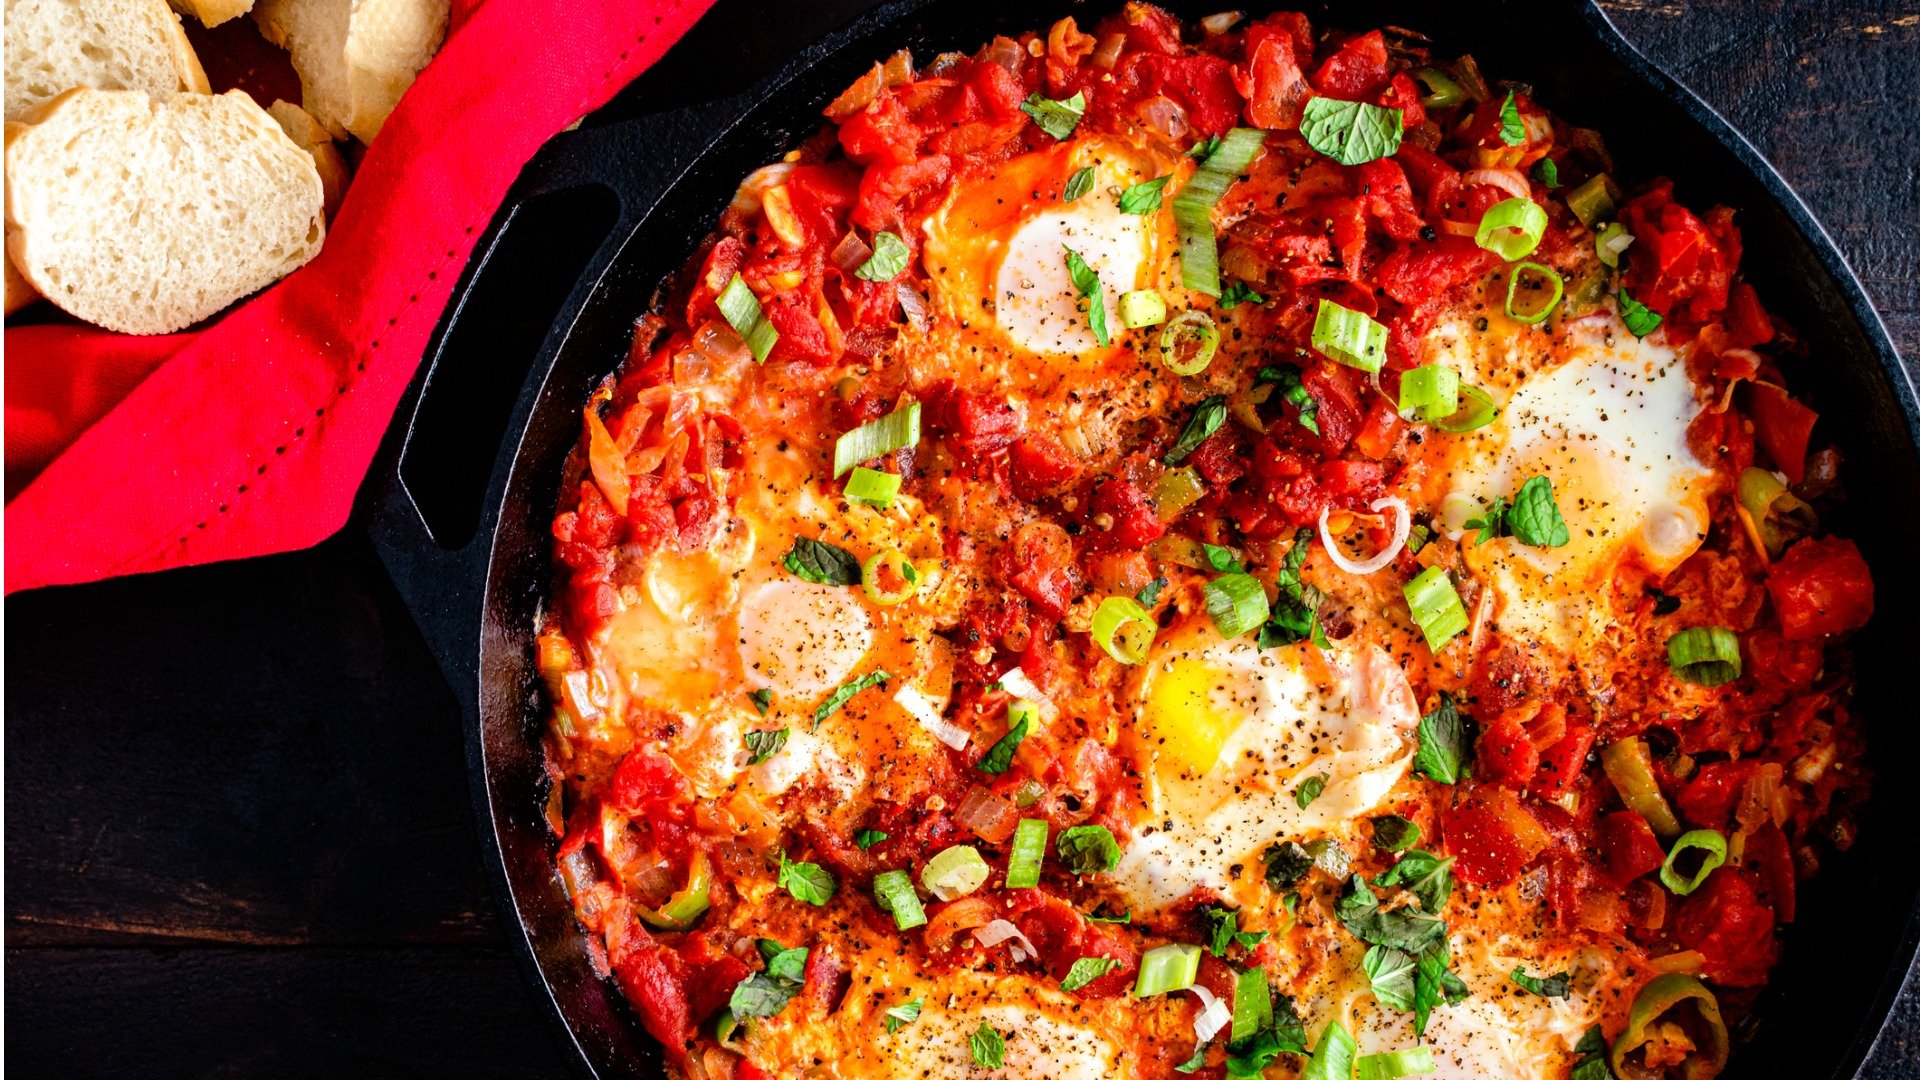 This is a close-up of a cast iron skillet with Turkish menemen eggs with tomato and peppers, a typical dish to try if you want a taste of the best Turkish food.